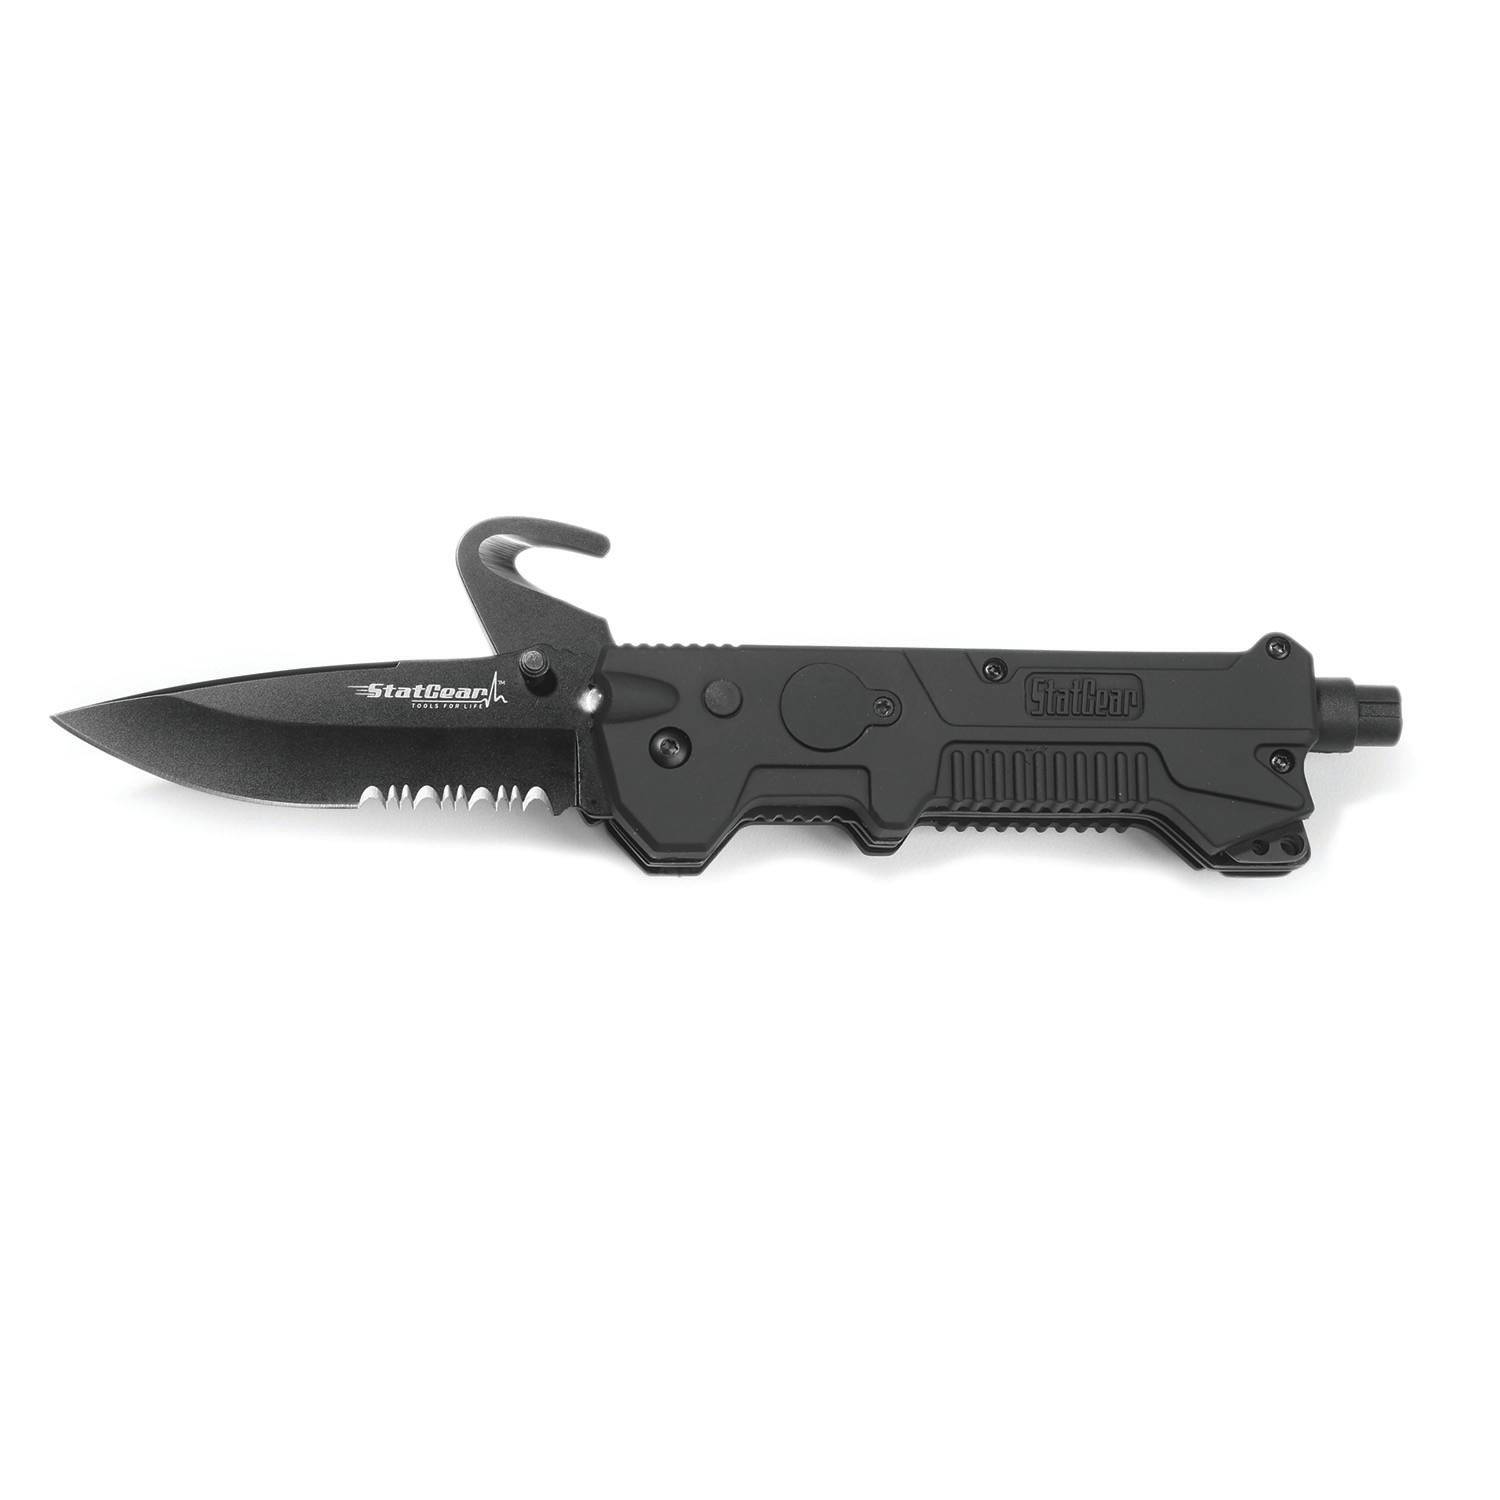 Stat Gear T3 Tactical Auto Rescue Tool